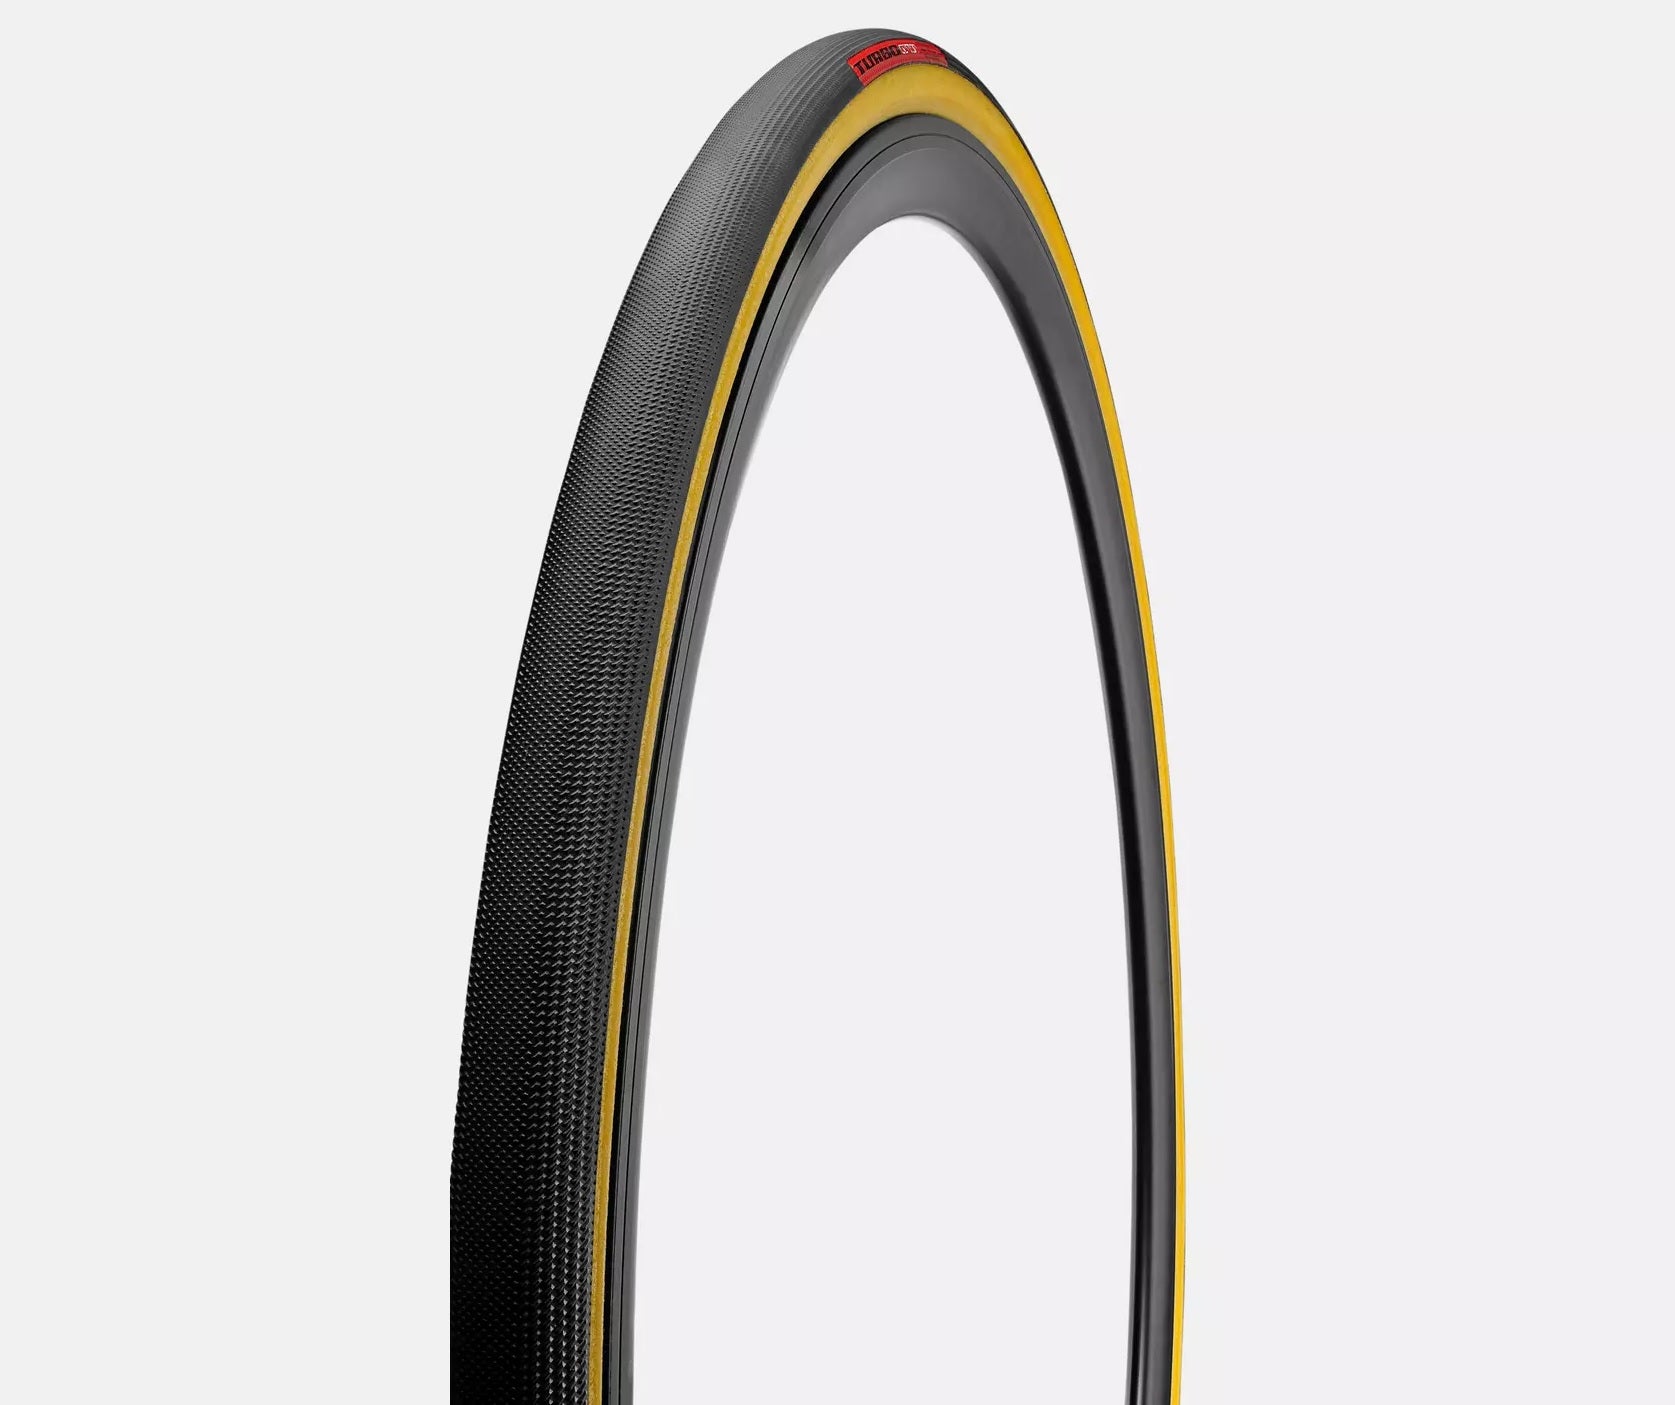 Specialized Turbo Cotton Hell of the North Road Bike Clincher Tires